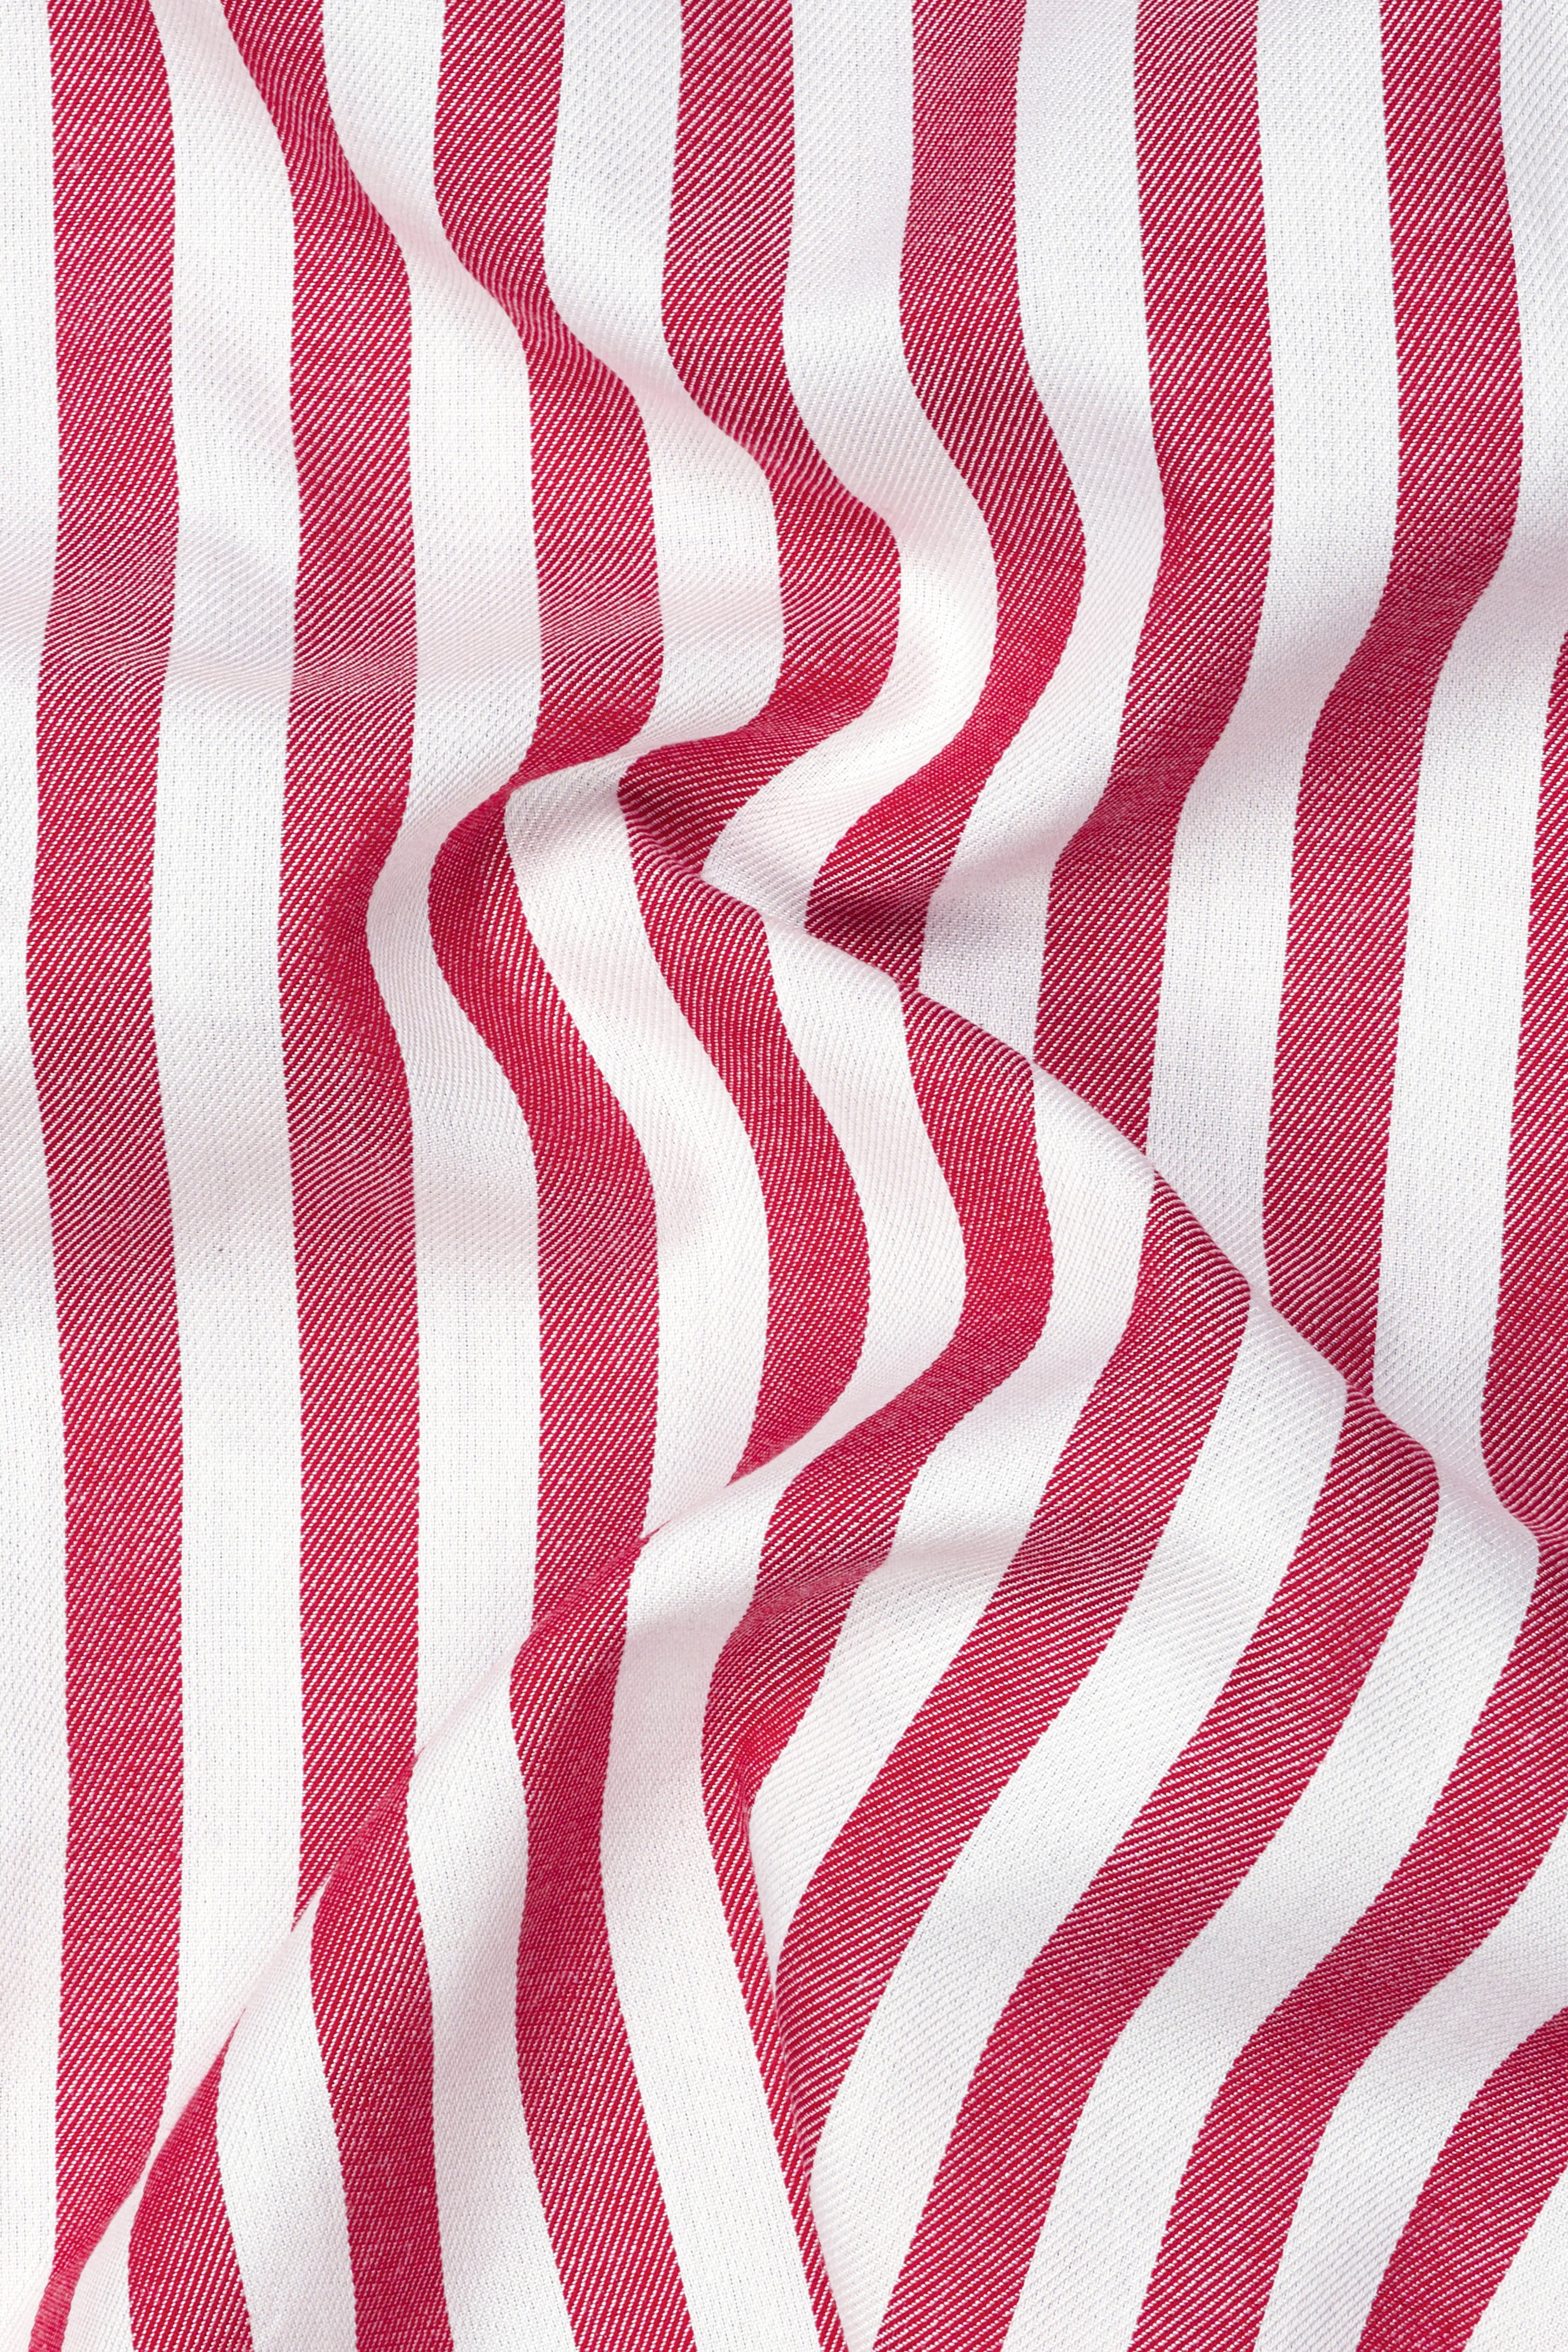 Chestnut Rose Pink and White Twill Striped Premium Cotton Shirt 10169-38, 10169-H-38, 10169-39, 10169-H-39, 10169-40, 10169-H-40, 10169-42, 10169-H-42, 10169-44, 10169-H-44, 10169-46, 10169-H-46, 10169-48, 10169-H-48, 10169-50, 10169-H-50, 10169-52, 10169-H-52